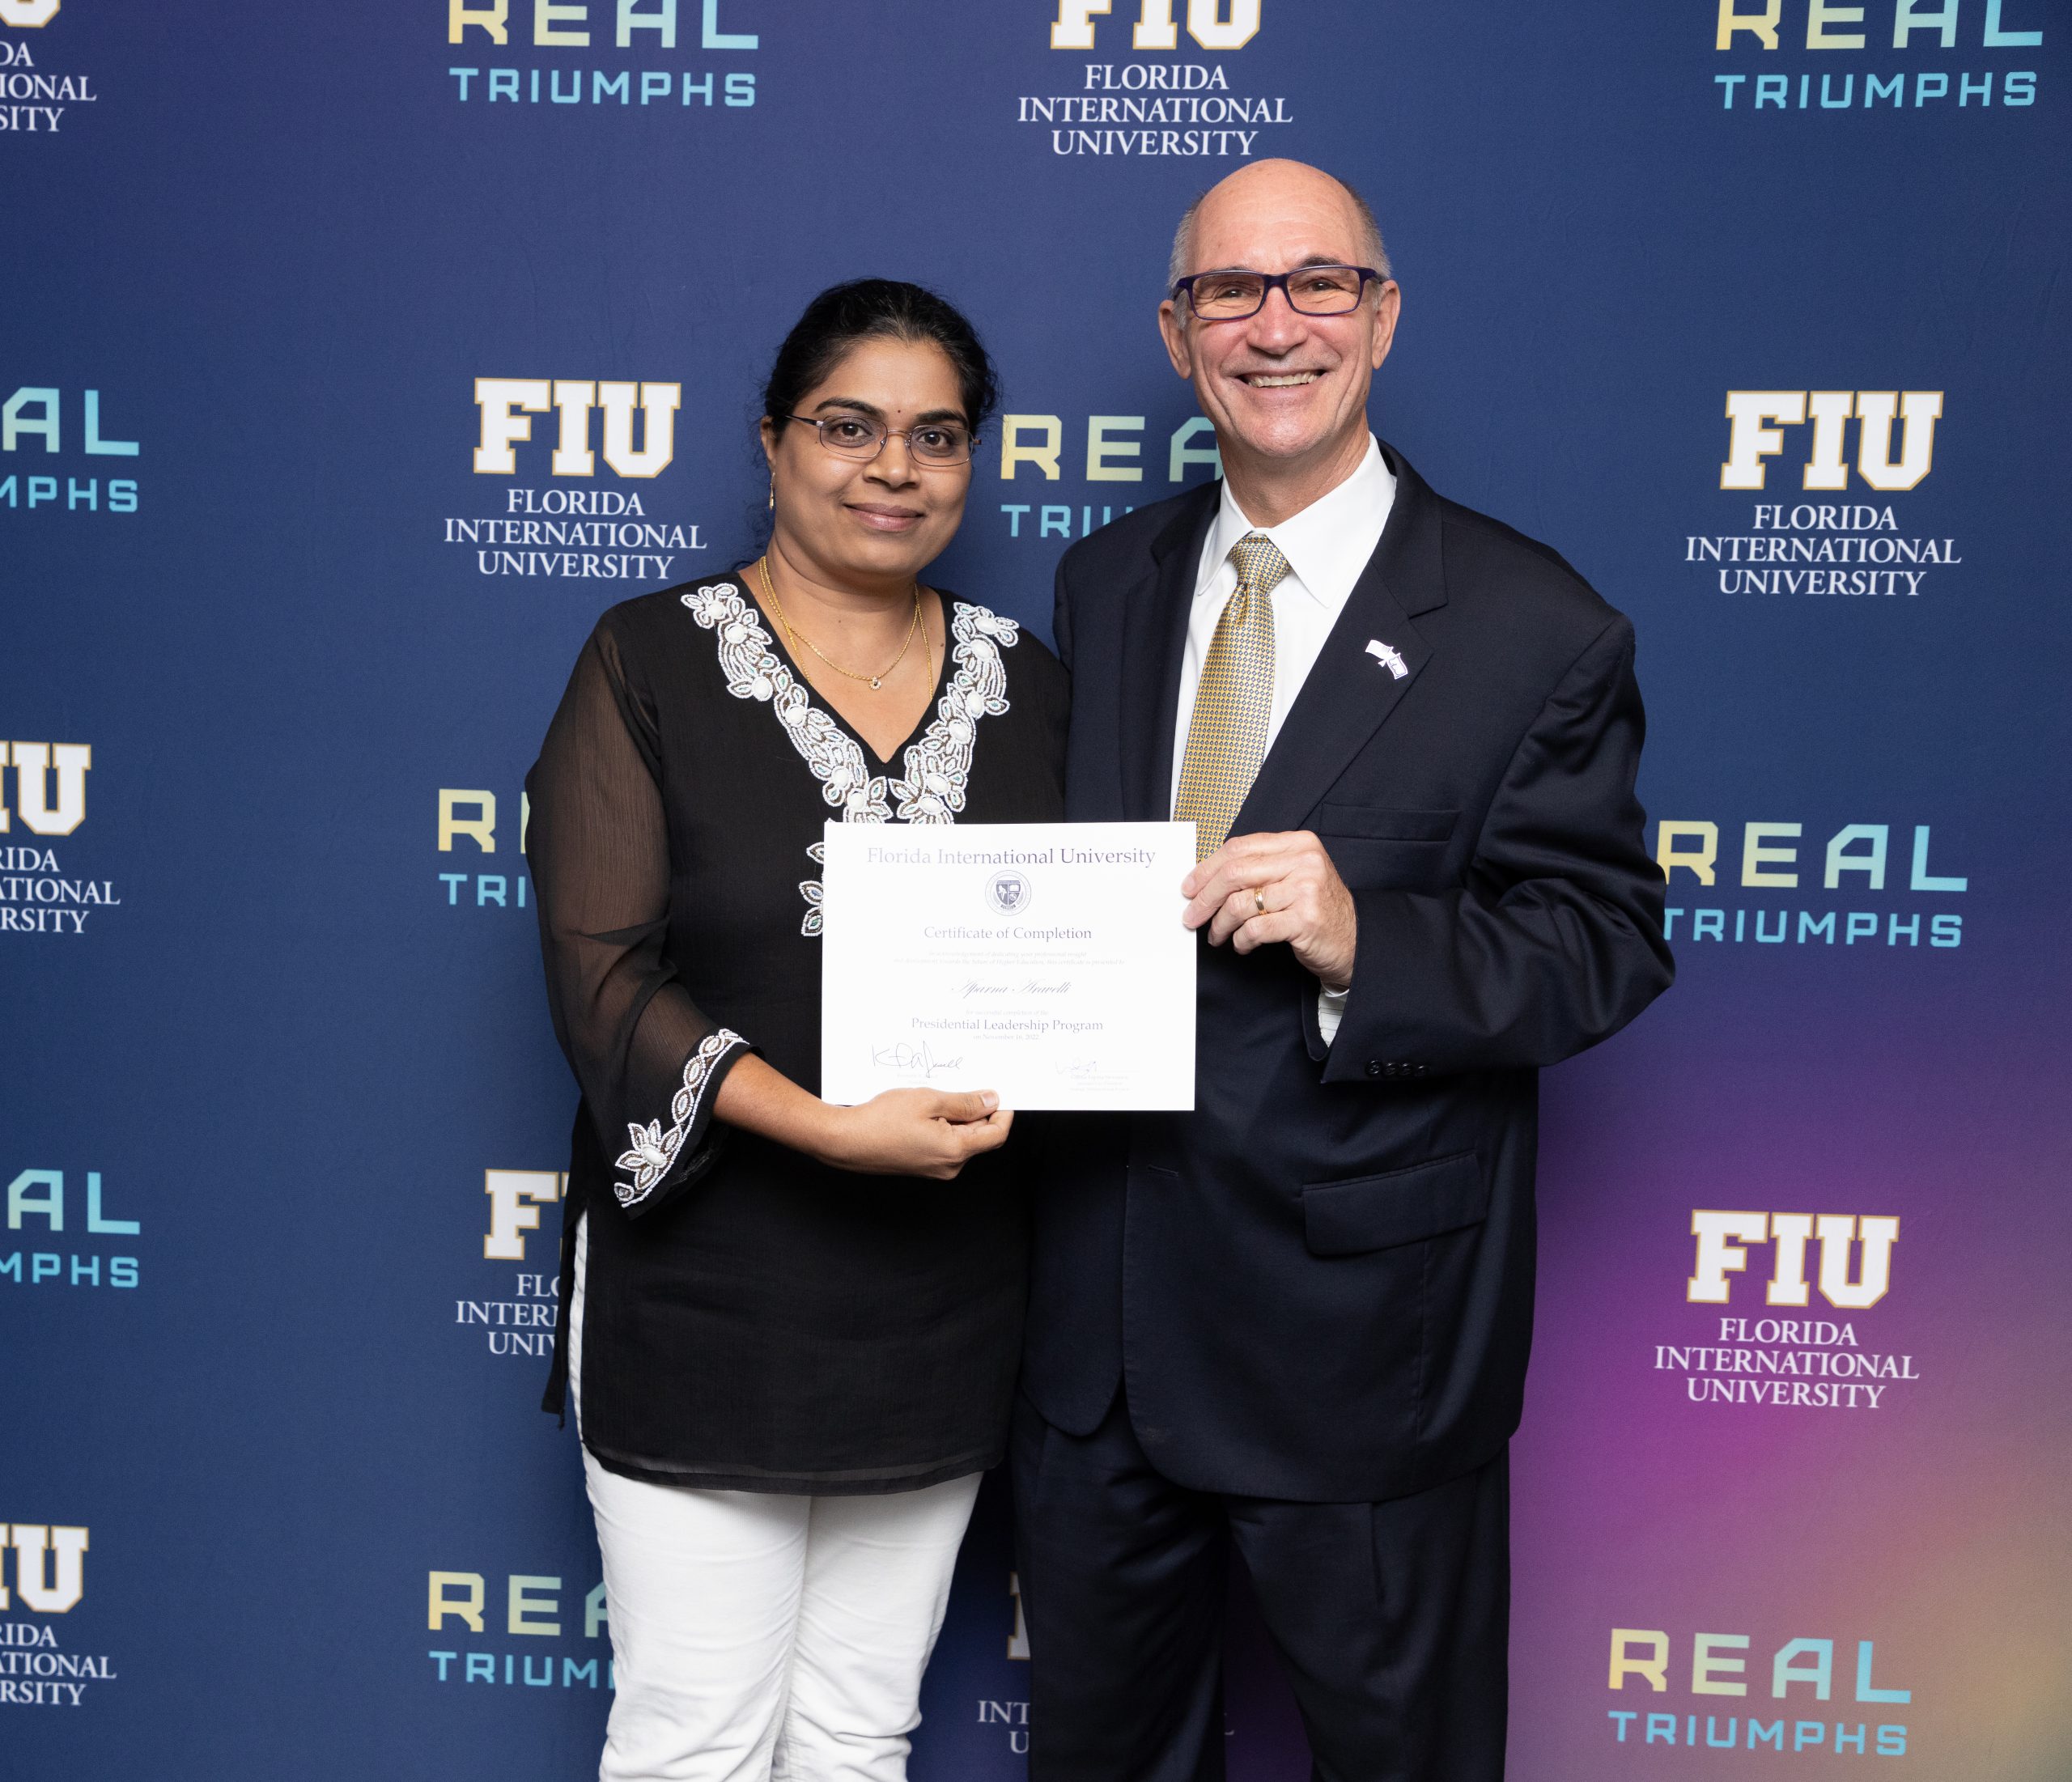 Congratulations to Aparna Aravelli for completing the FIU Presidential Leadership Program